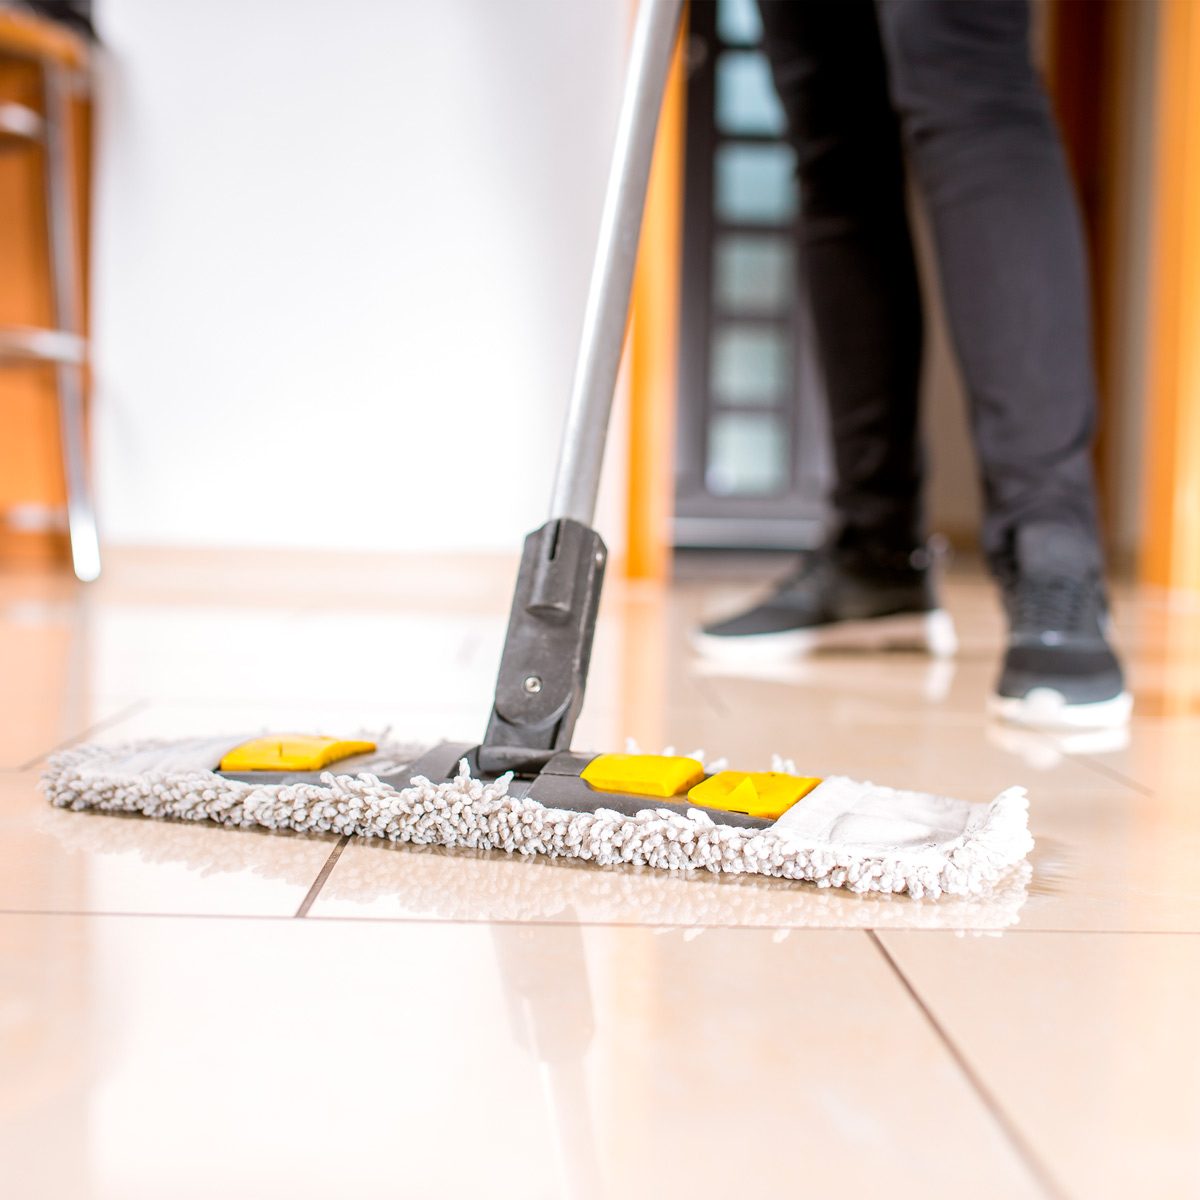 How to Clean Floors: Wood, Tile, Carpet and Everything Else